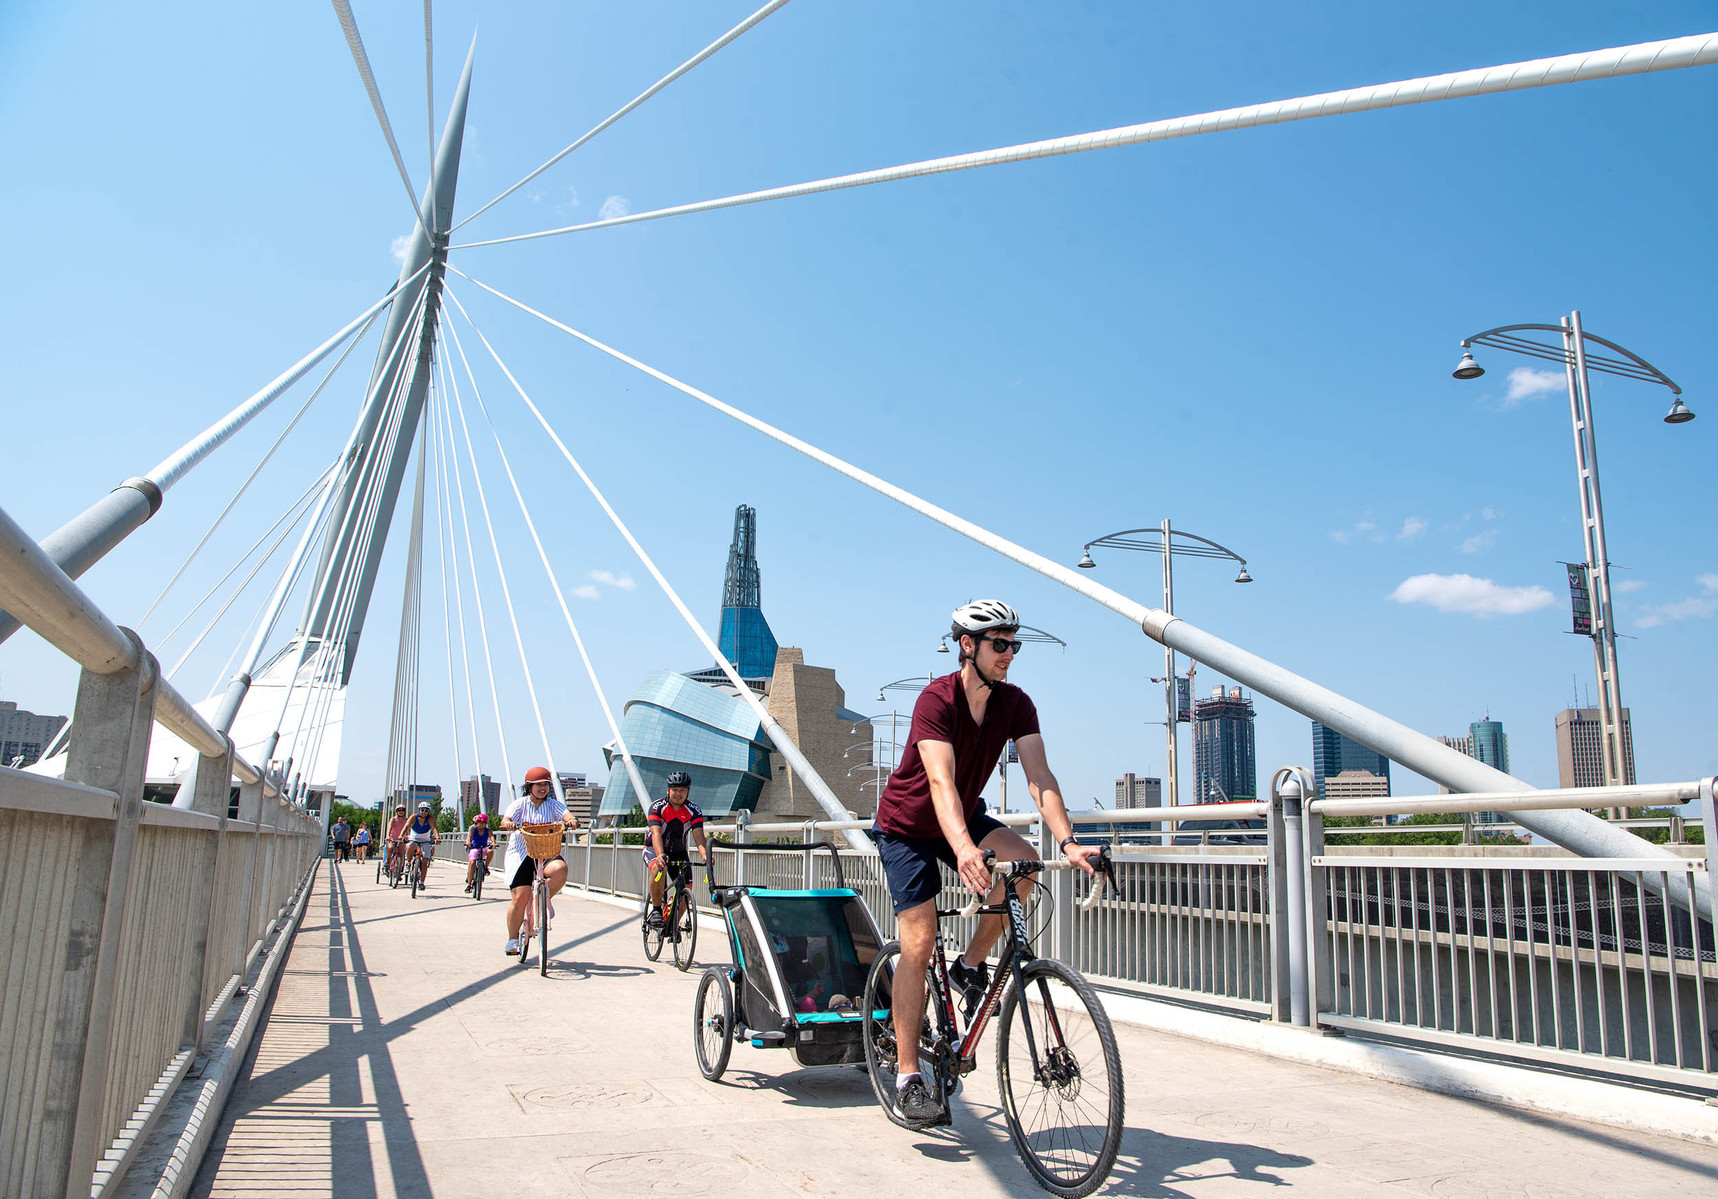 Cyclists taking part in the Tour de Glace, a 20-kilometre recreational event which makes four stops at local ice cream shops, ride on Esplanade Riel in Winnipeg on July 24, 2021. Photo by Alex Lupul